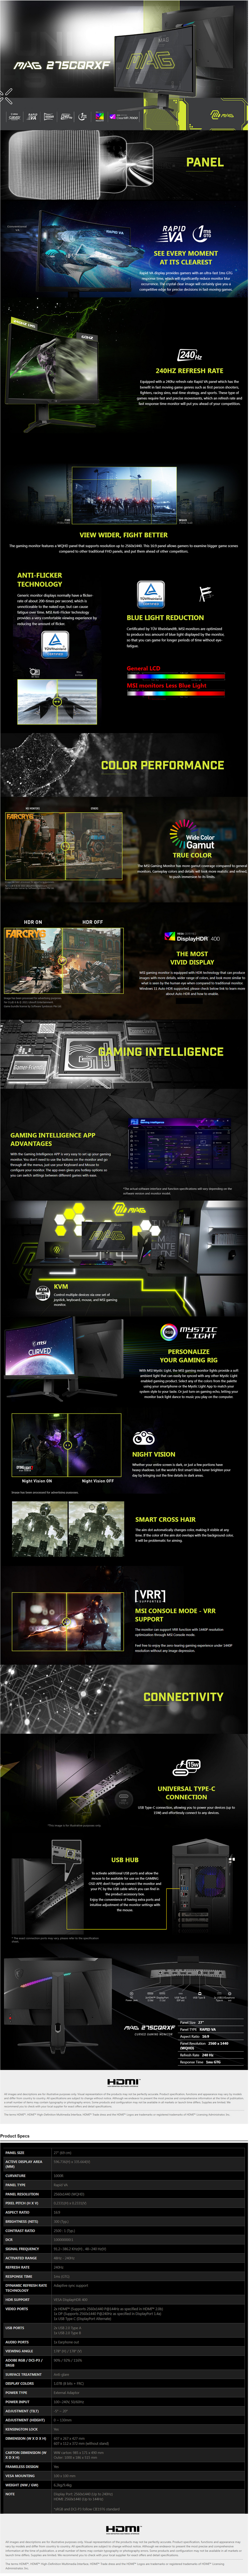 A large marketing image providing additional information about the product MSI MAG 275CQRXF 27" Curved WQHD 240Hz VA Monitor - Additional alt info not provided